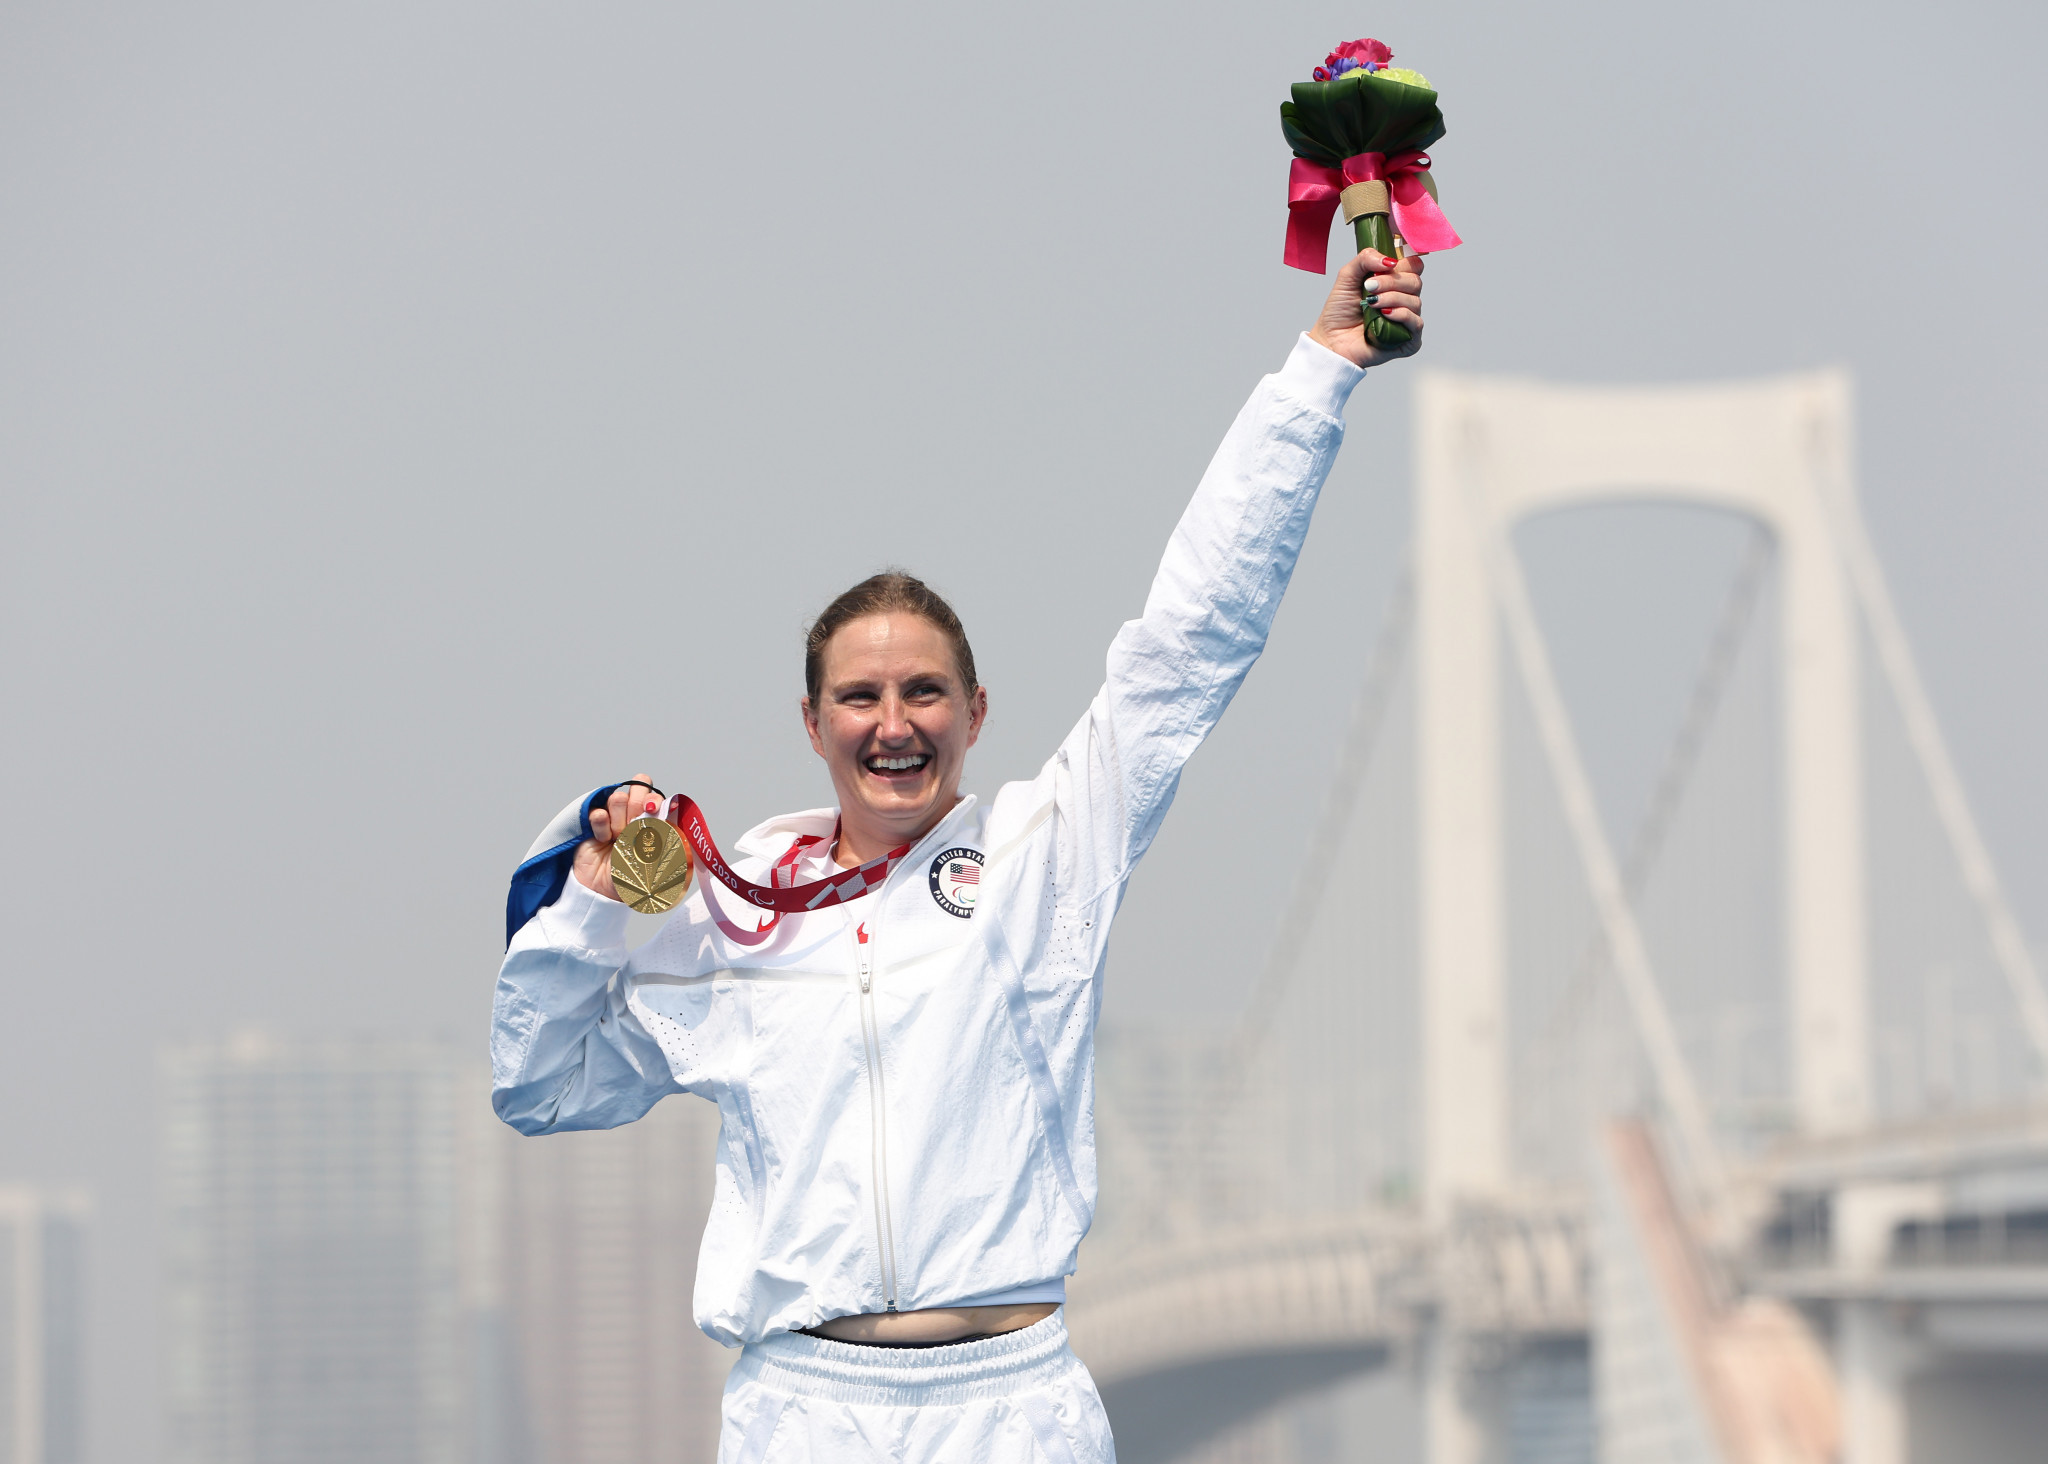 Back-to-back Paralympic champion Allysa Seely elected to World Triathlon Athletes' Committee